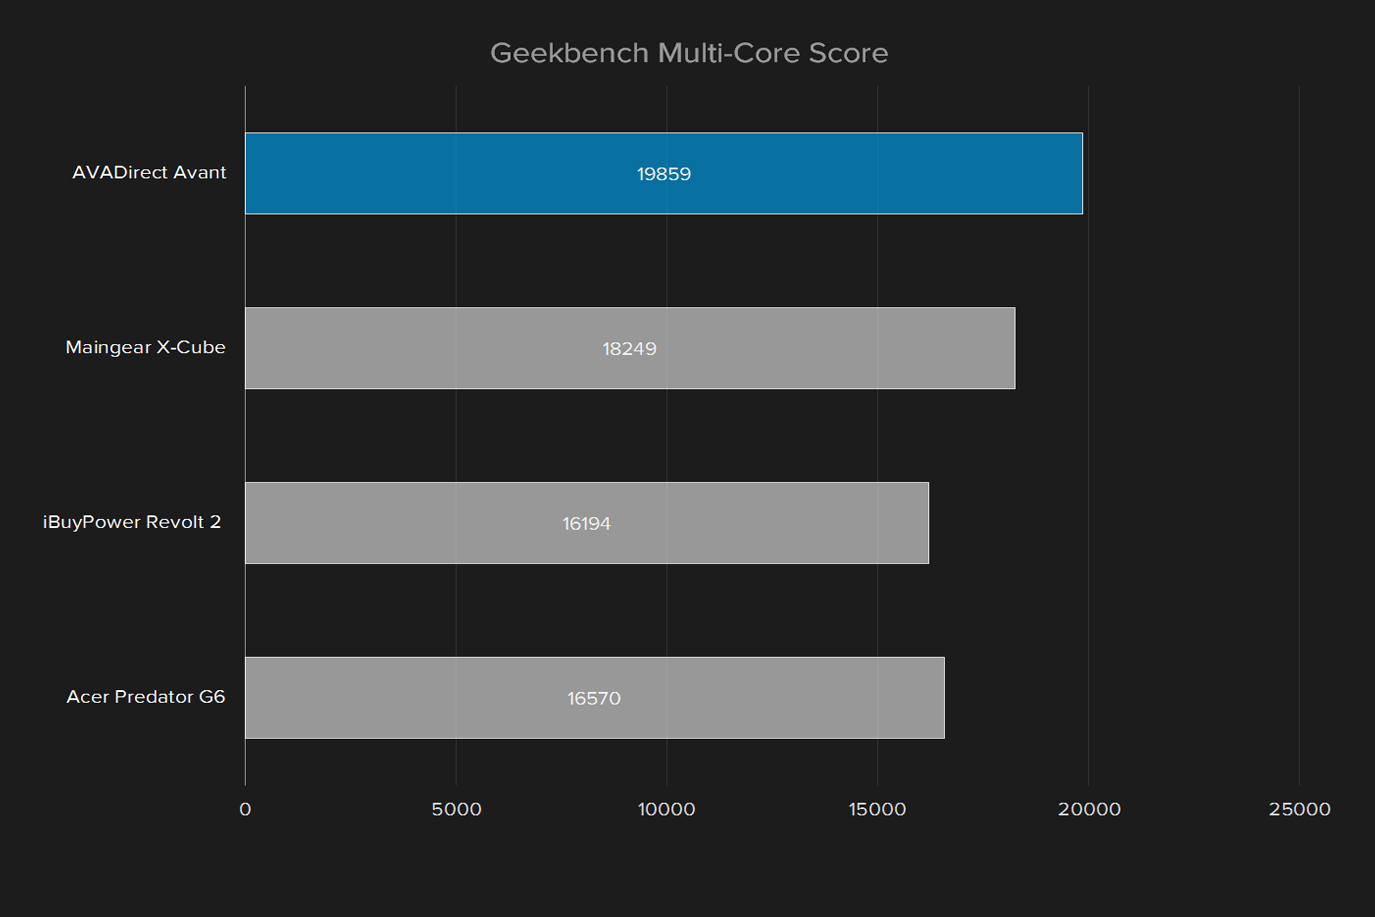 avadirect avant 2016 review geekbench multi core